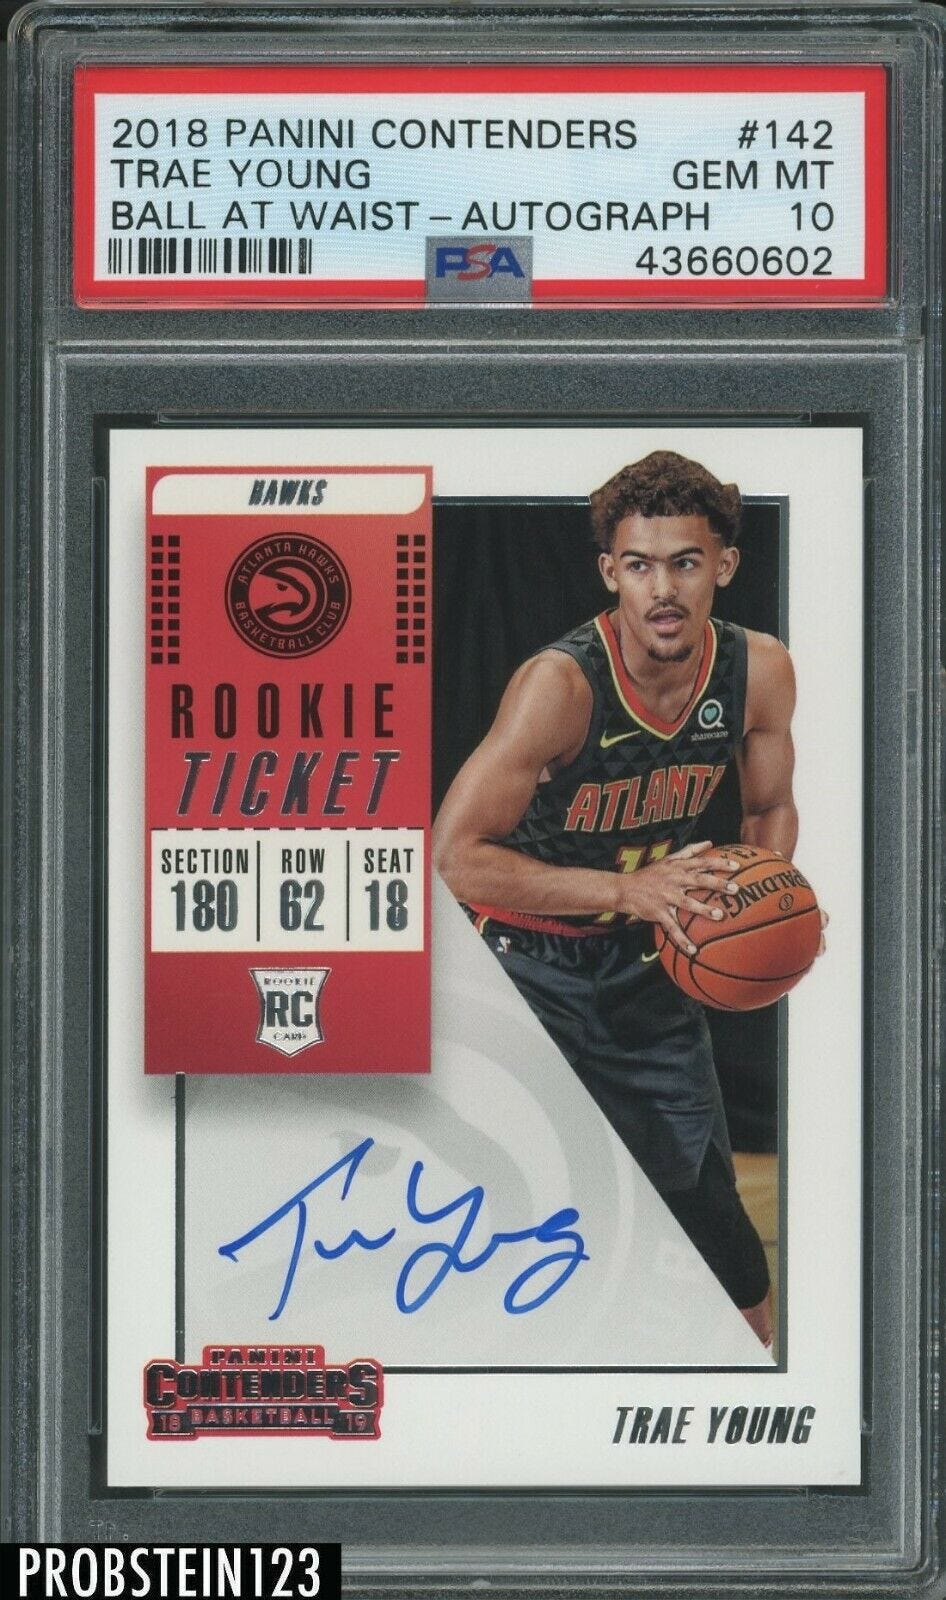 Image 1 - 2018-19-Panini-Contenders-Rookie-Ticket-Trae-Young-RC-AUTO-Ball-At-Waist-PSA-10